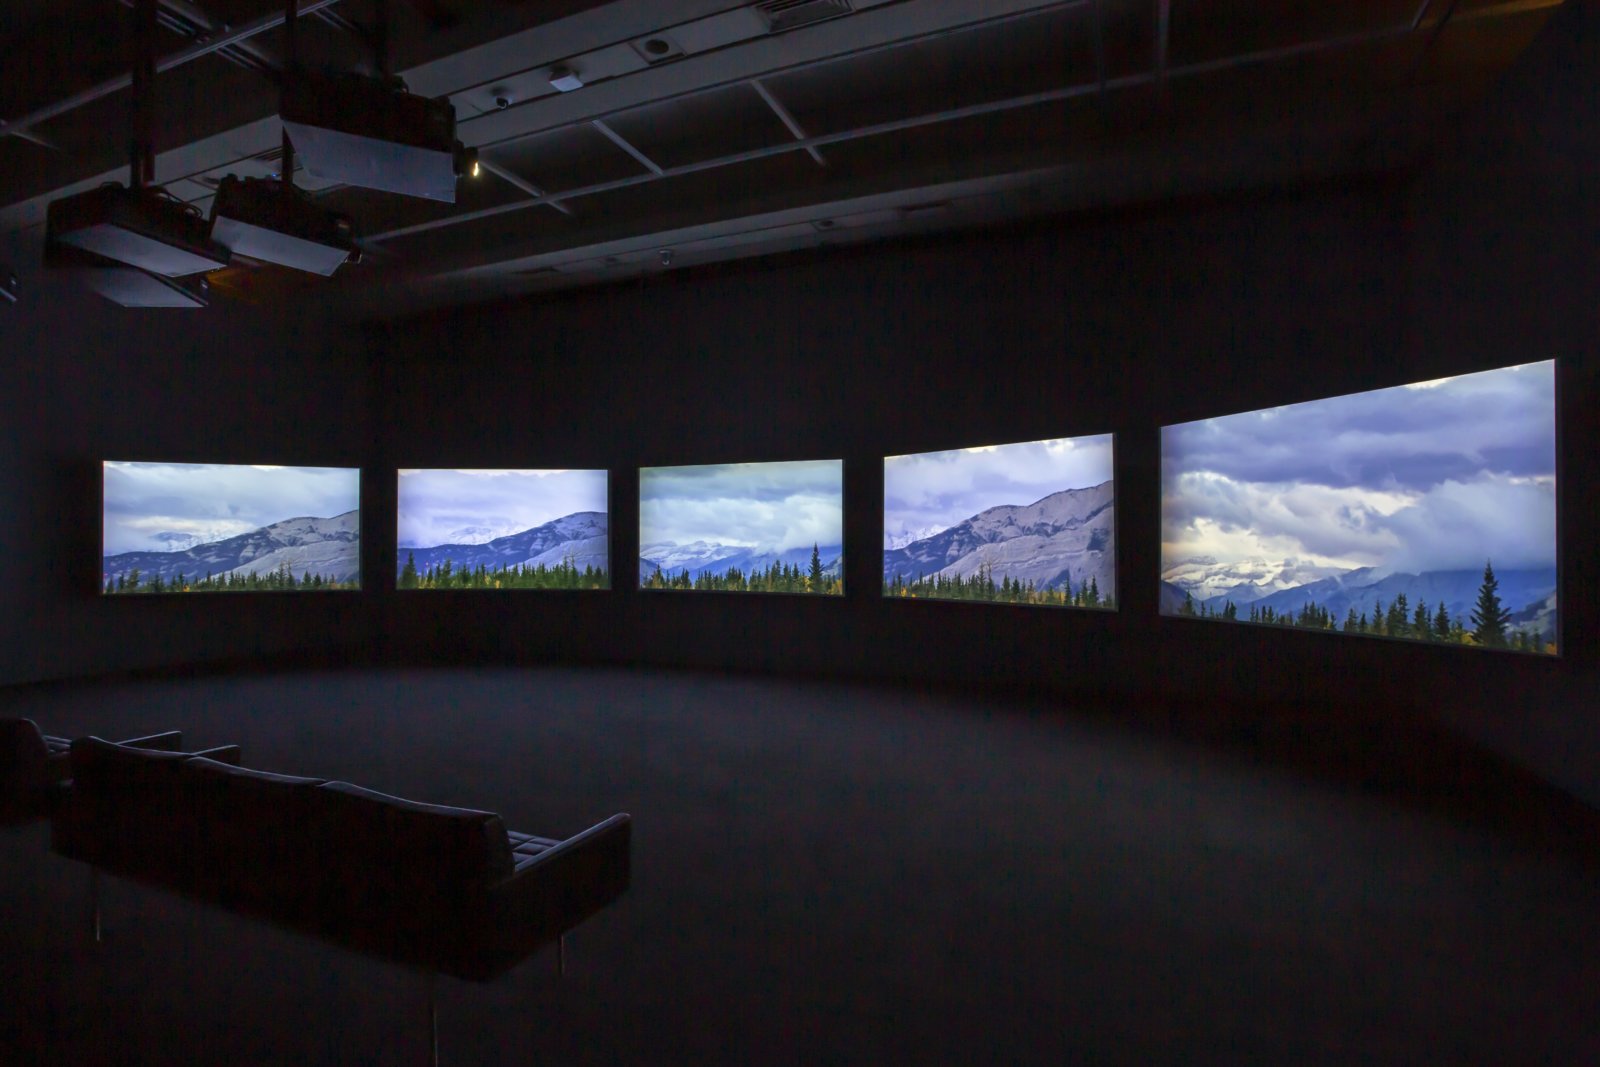 Brian Jungen and Duane Linklater, Modest Livelihood (Director’s Cut), 2019, 5 channel video, colour, silent, 46 minutes, 34 seconds. Installation view, Friendship Centre, Art Gallery of Ontario, Toronto, Canada, 2019